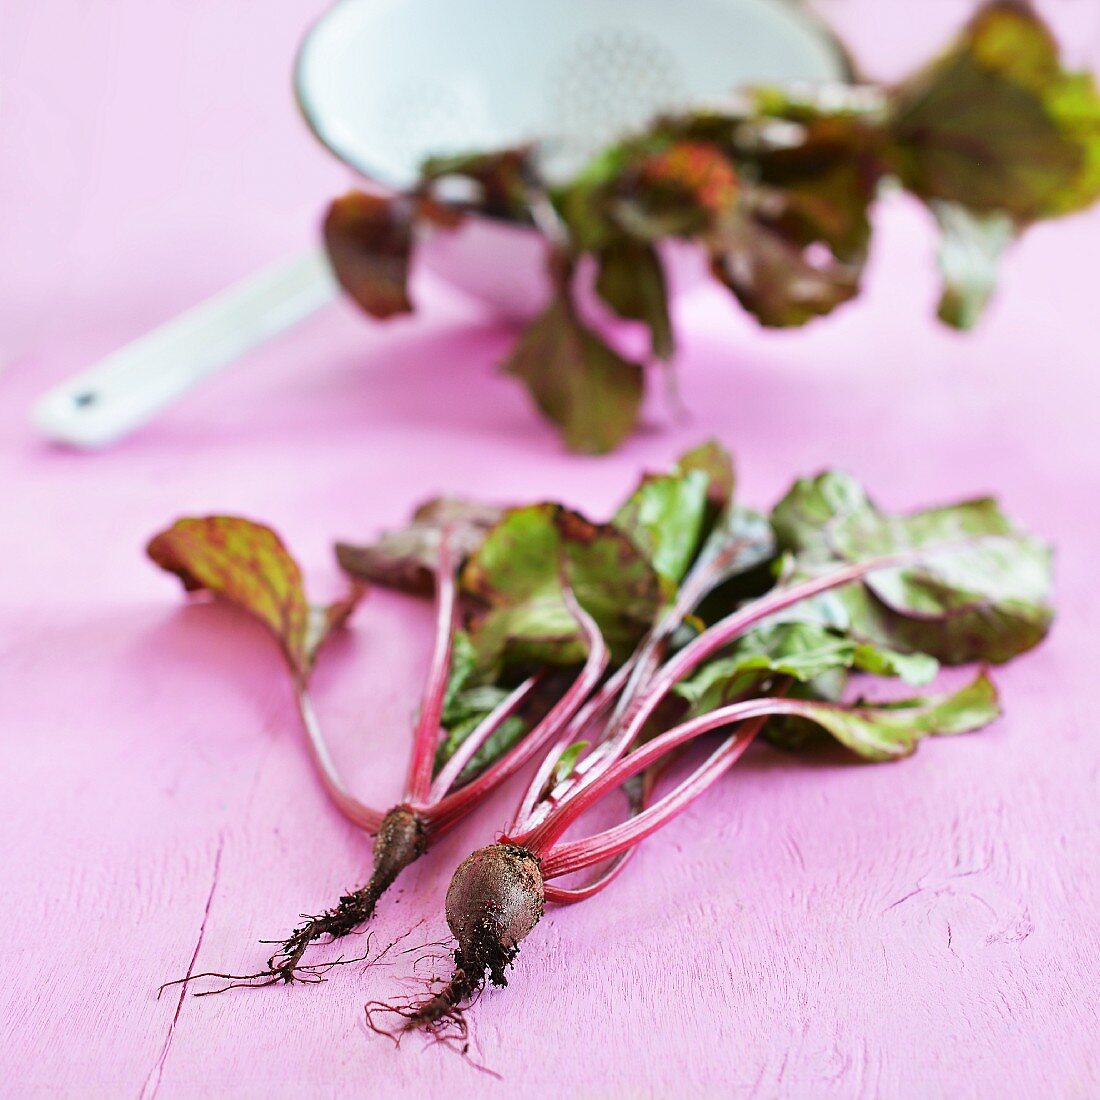 Beetroot with roots with fresh leaves in a colander in the background